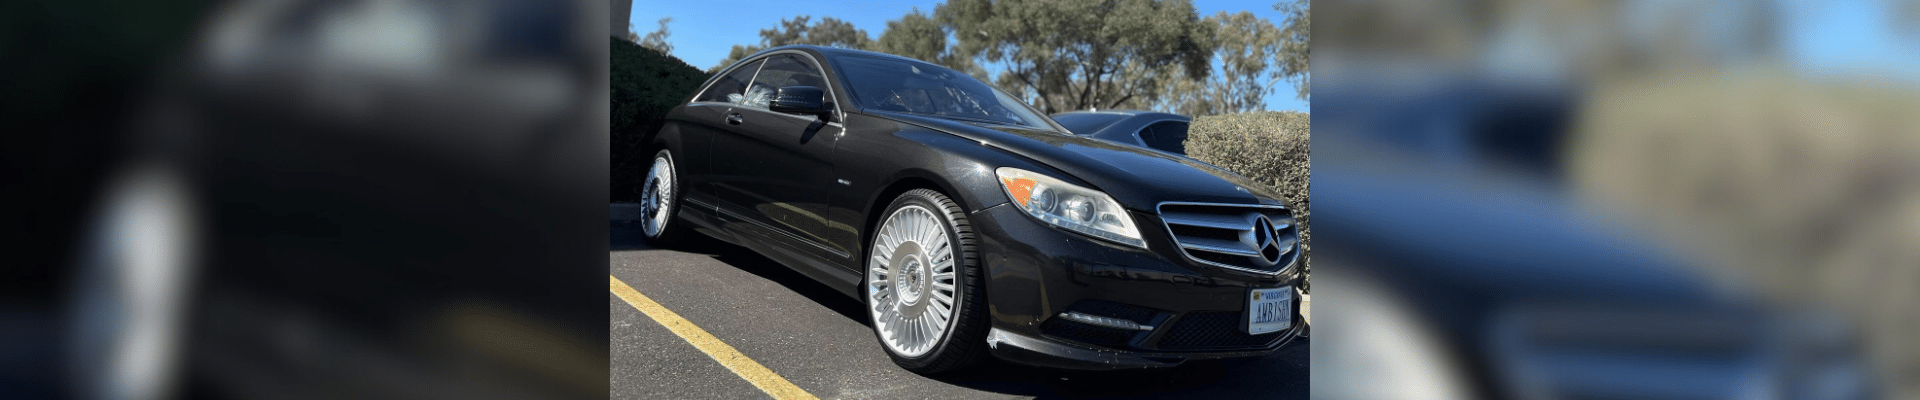 Mercedes Benz CL550 Gallery img